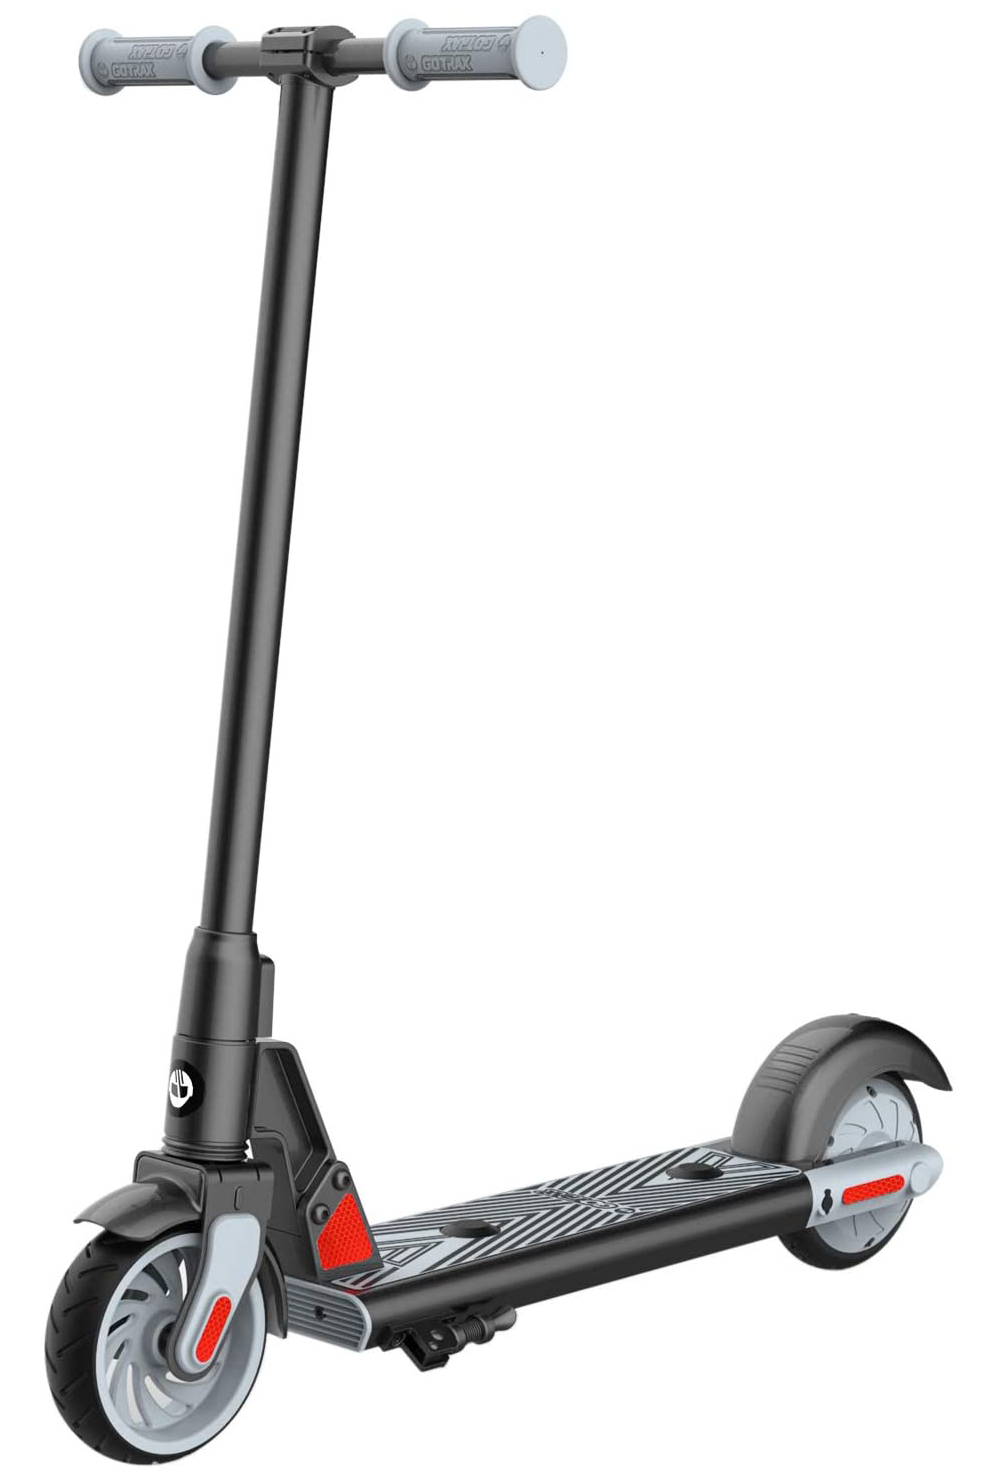 The GoTrax GKS electric scooter standing upright